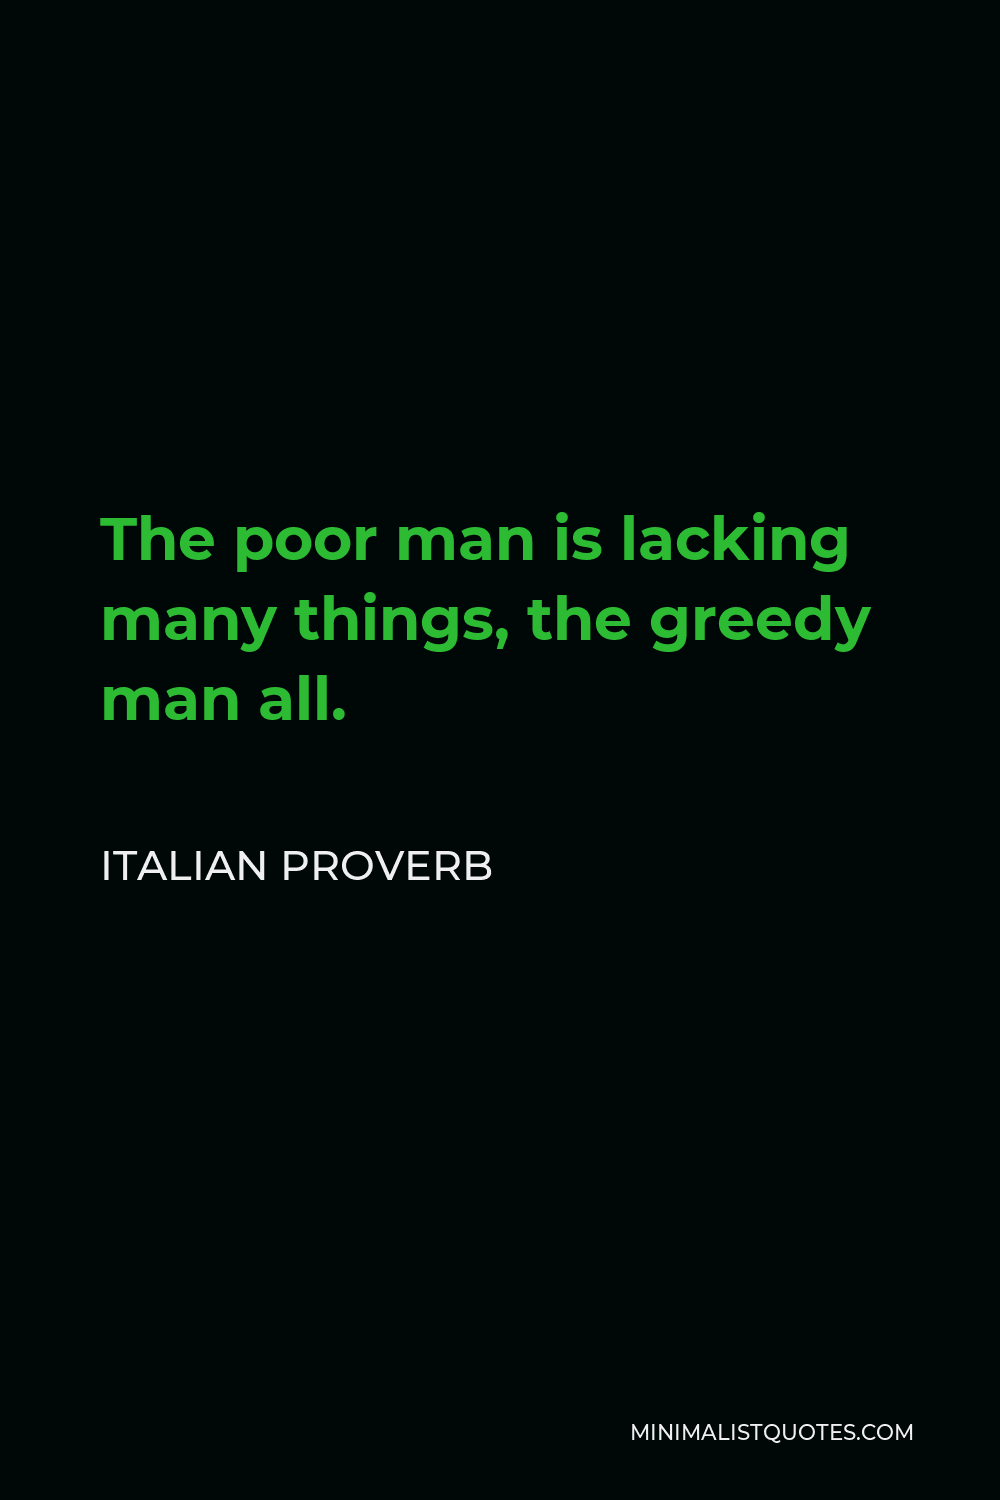 Italian Proverb Quote - The poor man is lacking many things, the greedy man all.